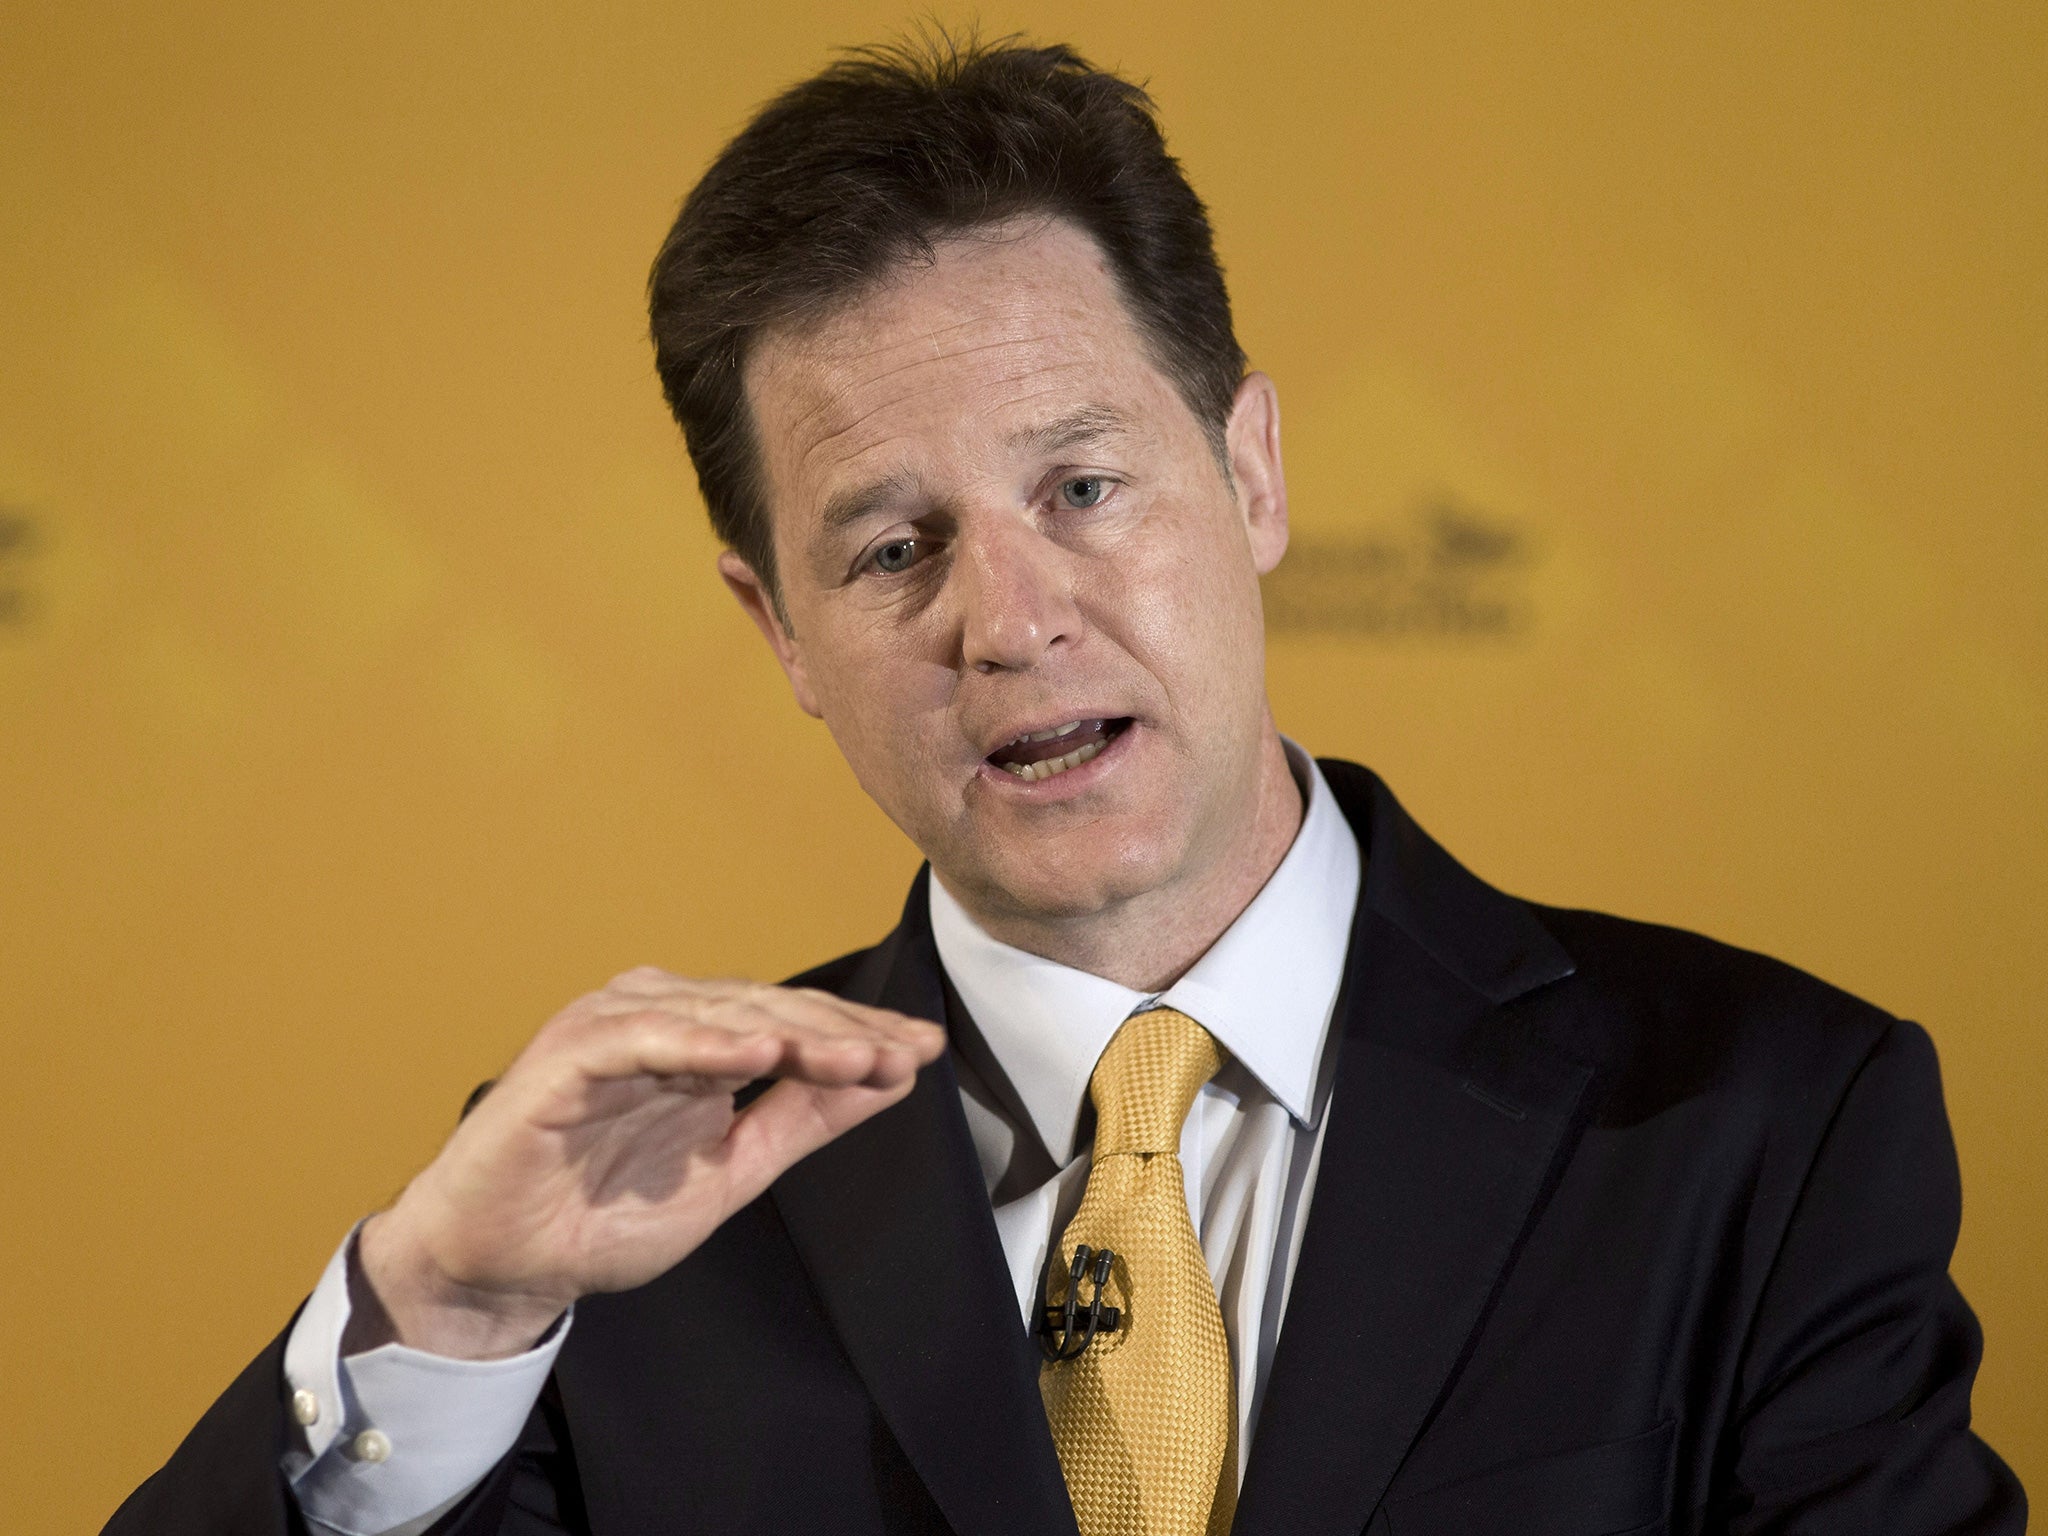 Nick Clegg will start his comeback at the Lib Dem conference